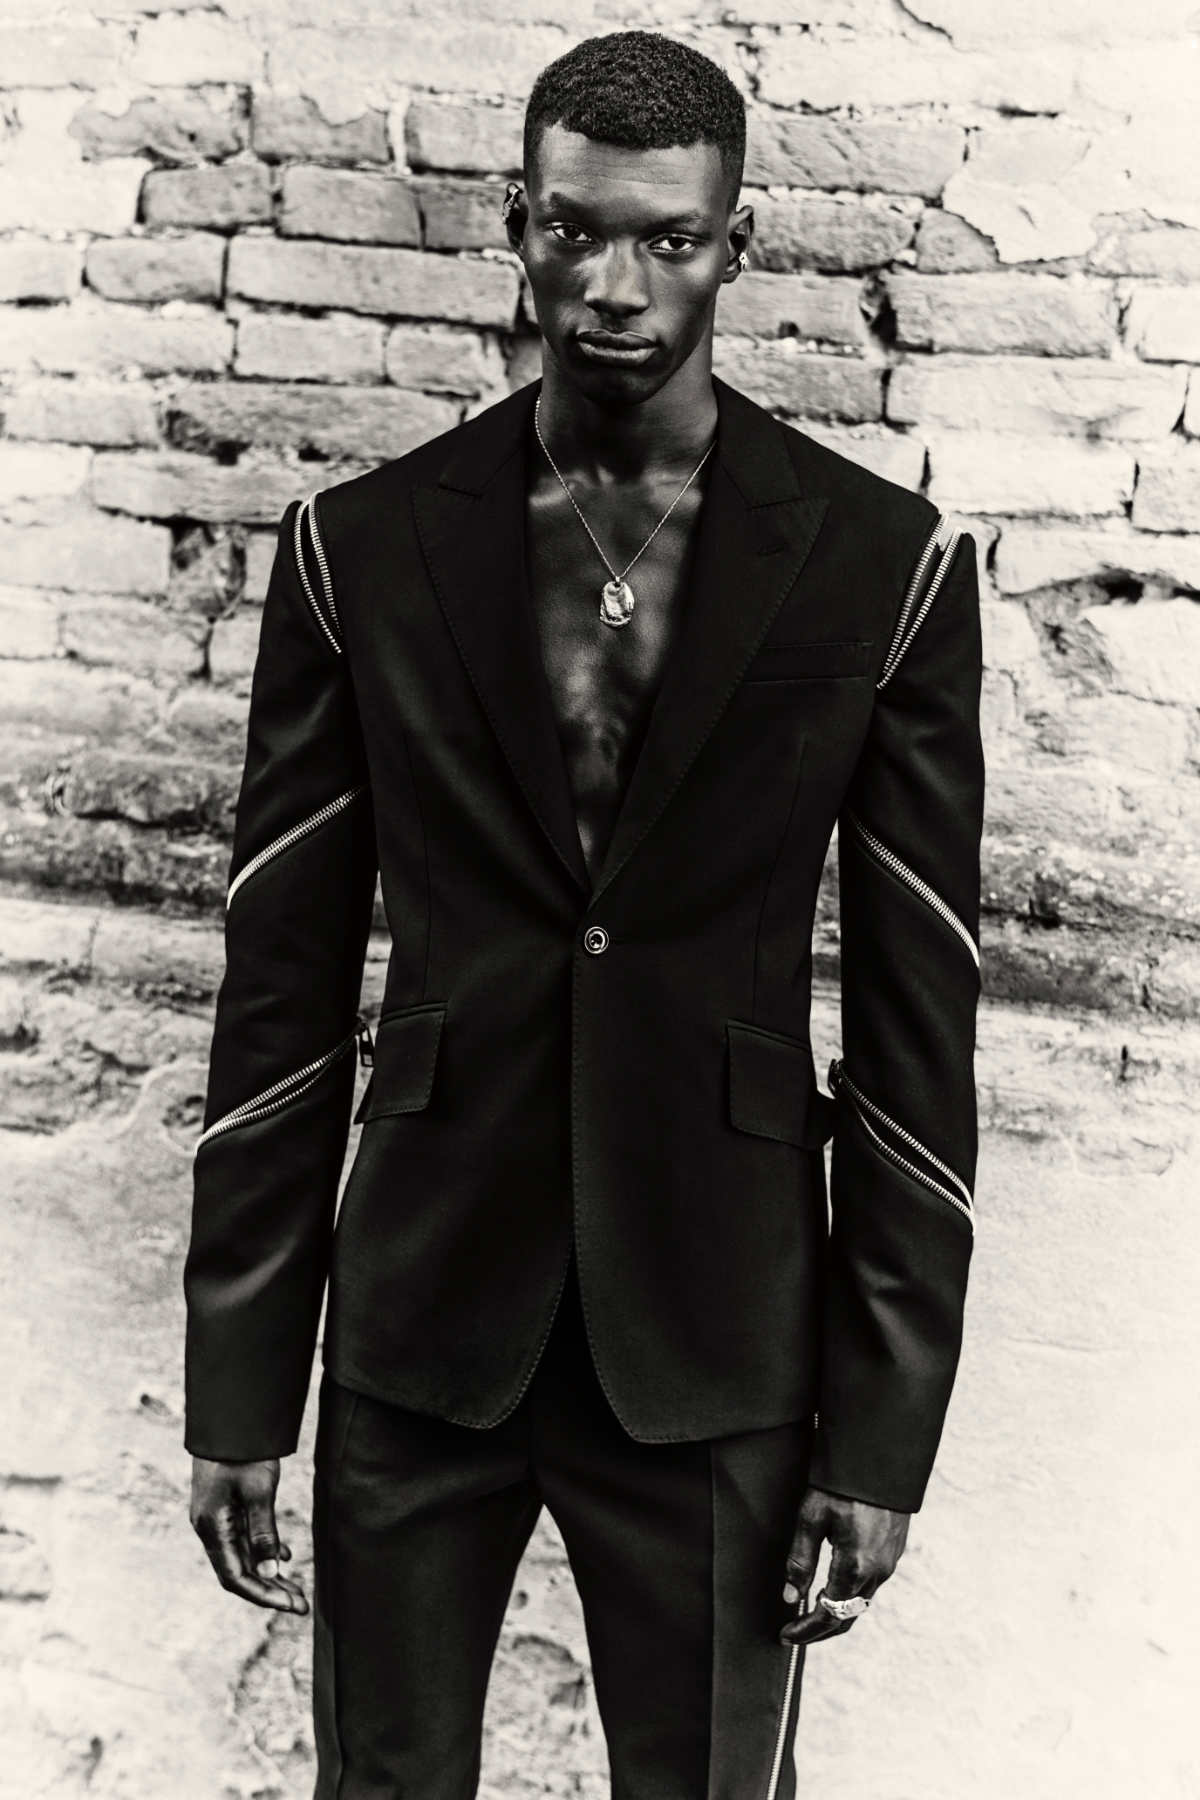 ALEXANDER MCQUEEN, Slashed Double Breasted Tailored Coat